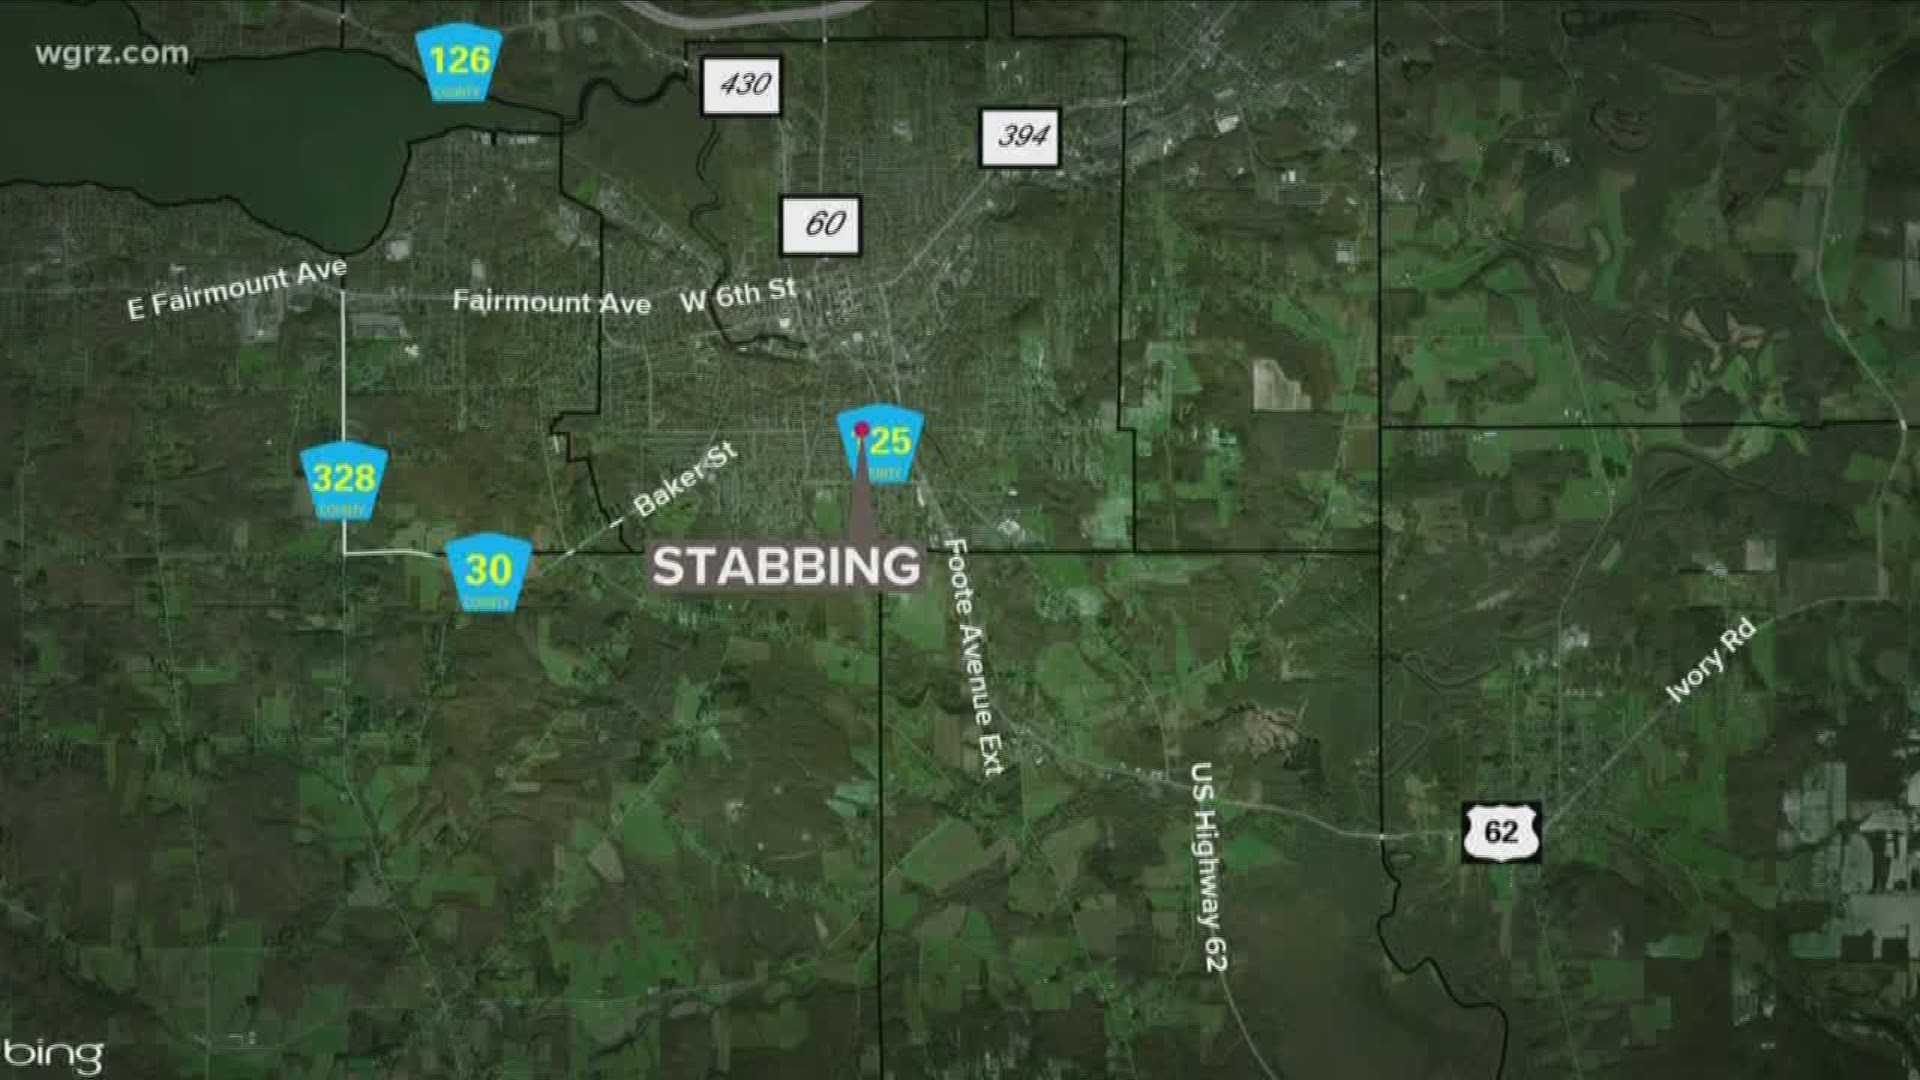 Police are searching for a suspect after an early morning stabbing in Jamestown. Police say the victim was stabbed in a fight just before 3 am.